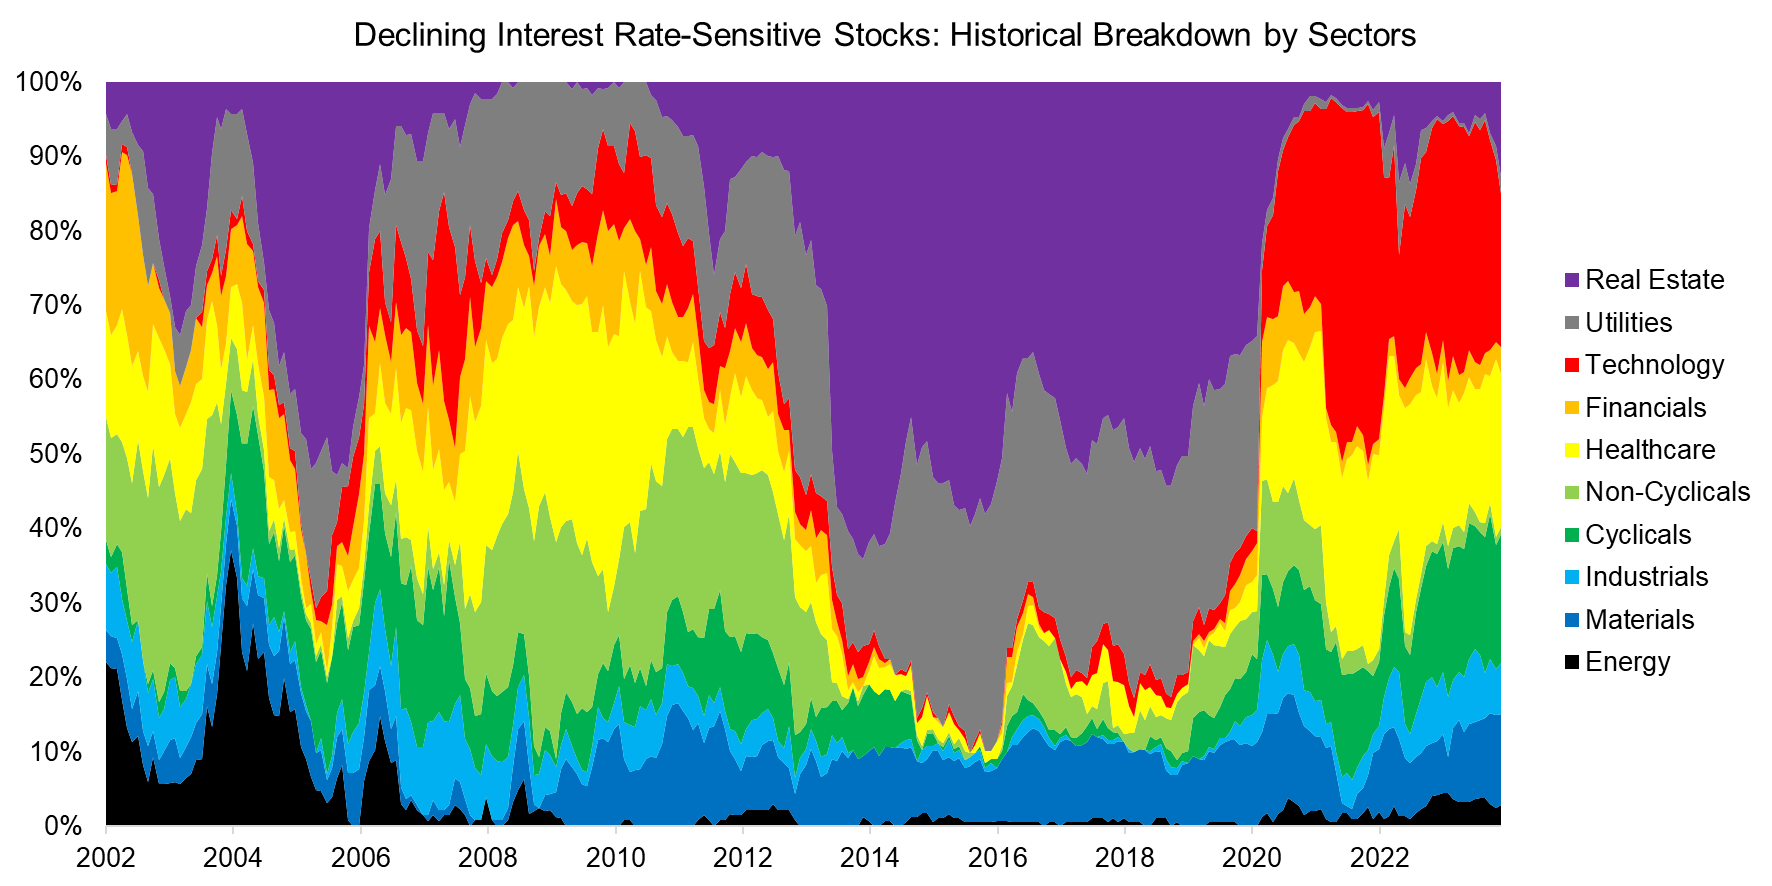 Declining Interest Rate-Sensitive Stocks Historical Breakdown by Sectors